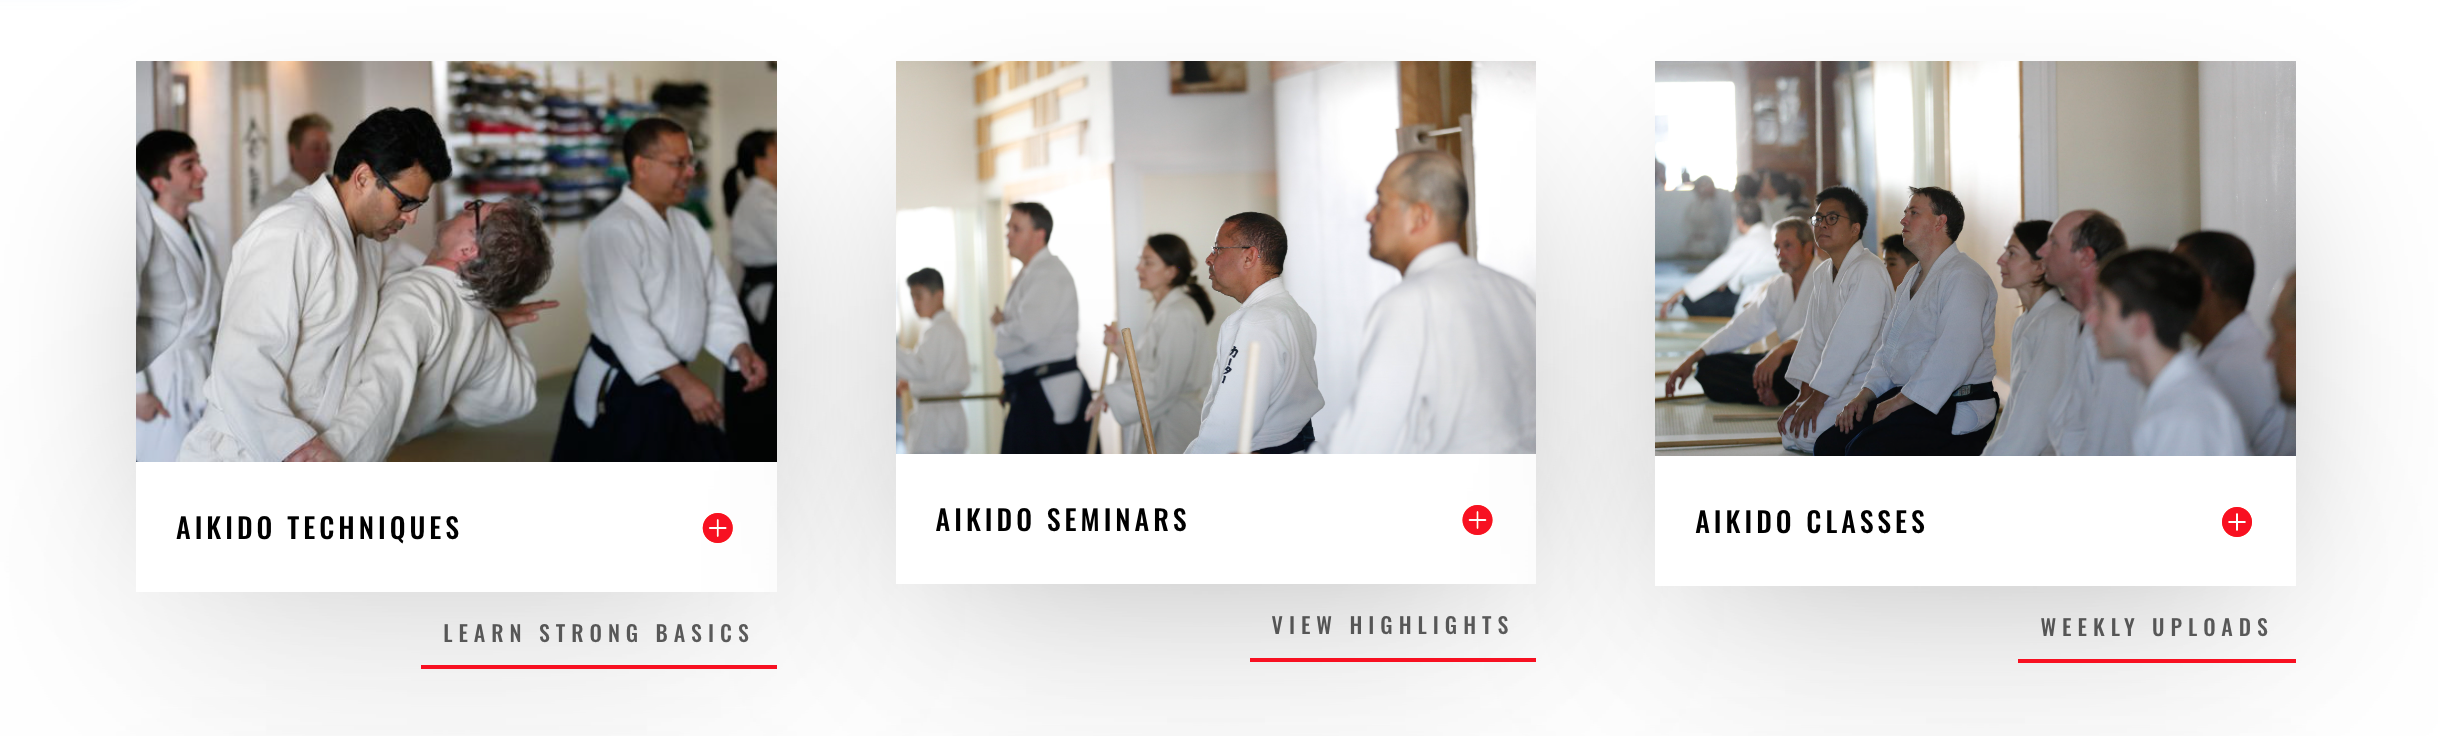 AIKIDO VIDEO CHANNEL